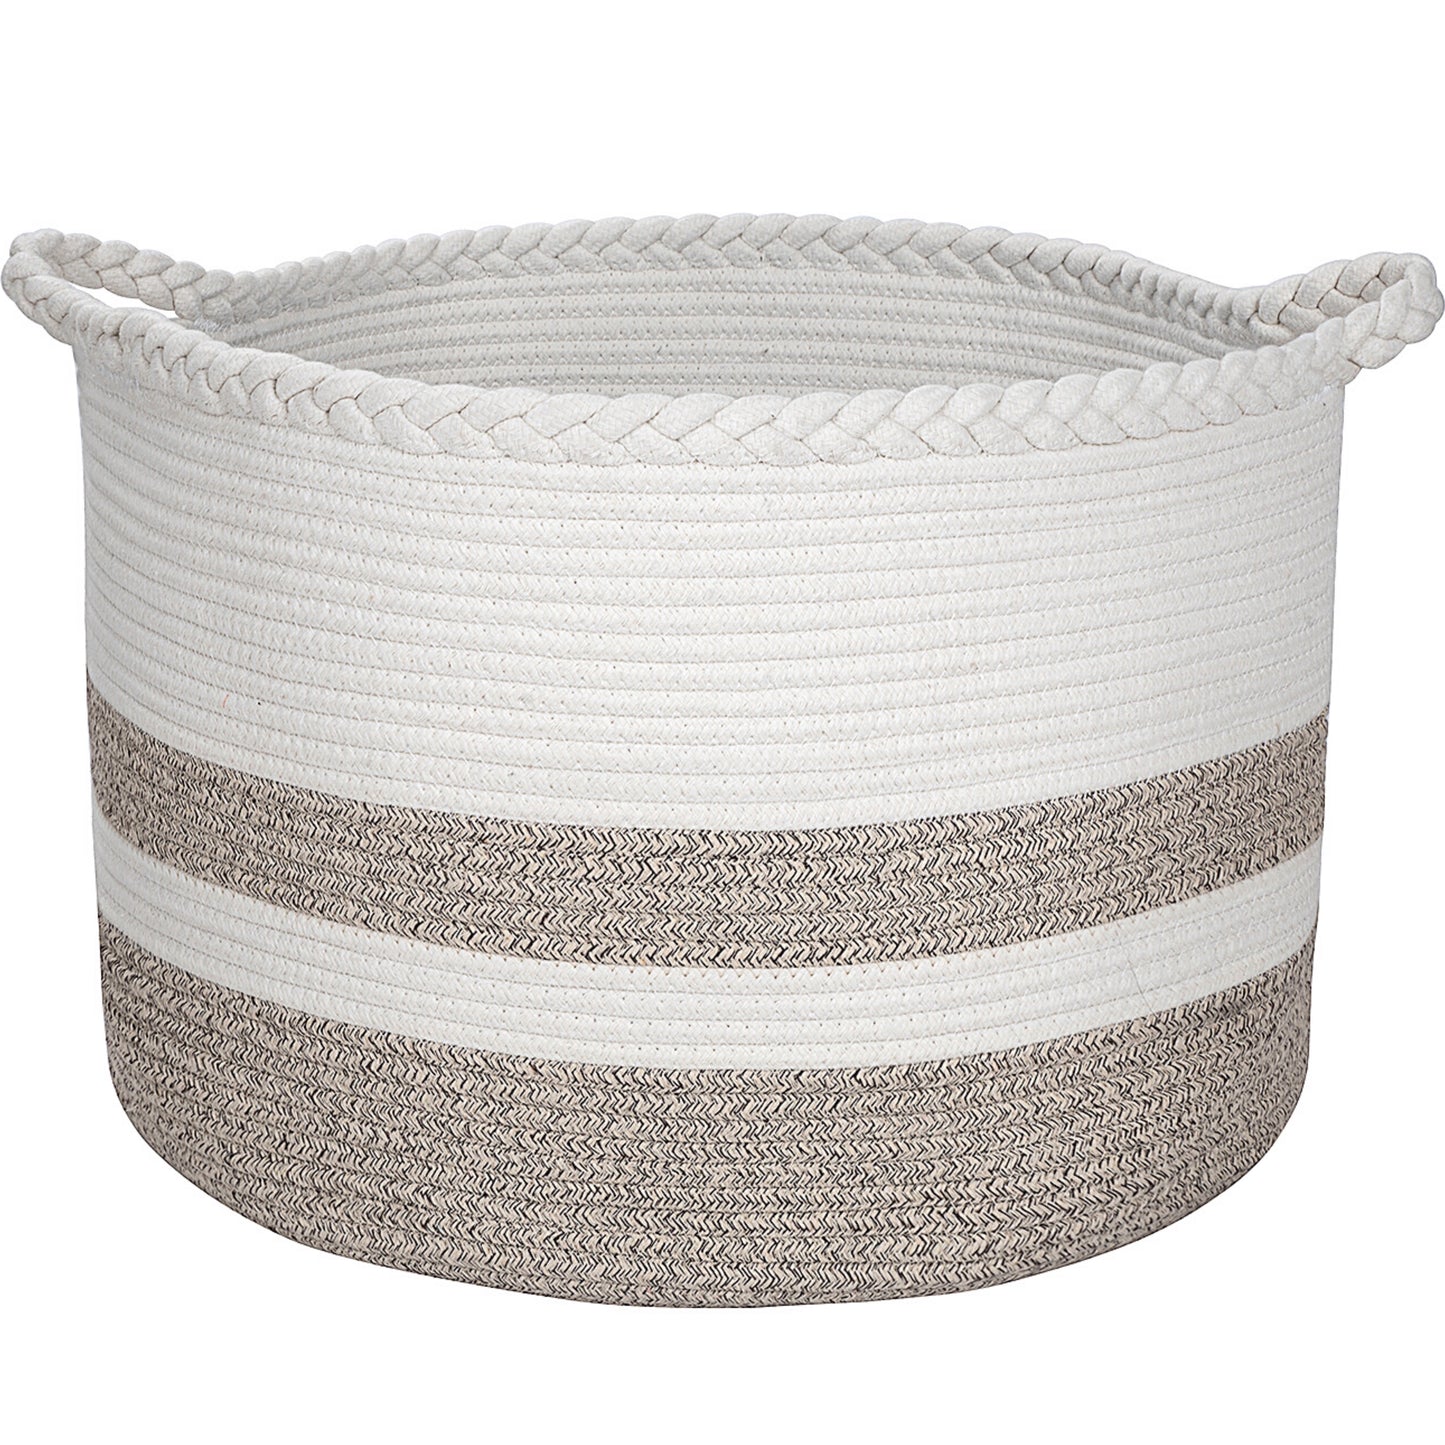 Cotton Rope Basket for Blankets or Toys